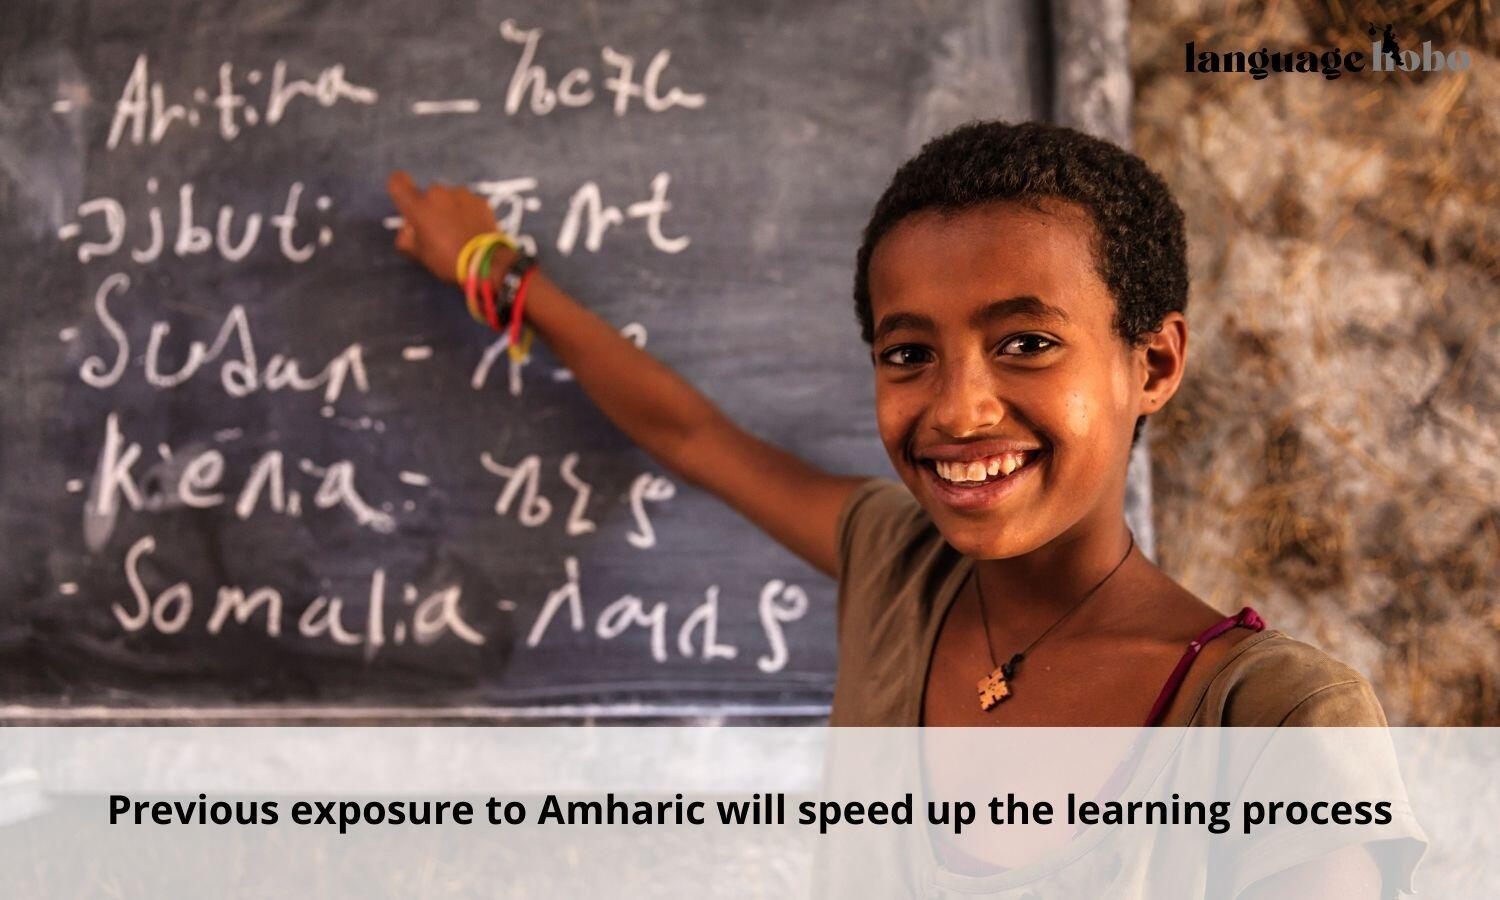 Previous exposure to amharic will speed up the learning process